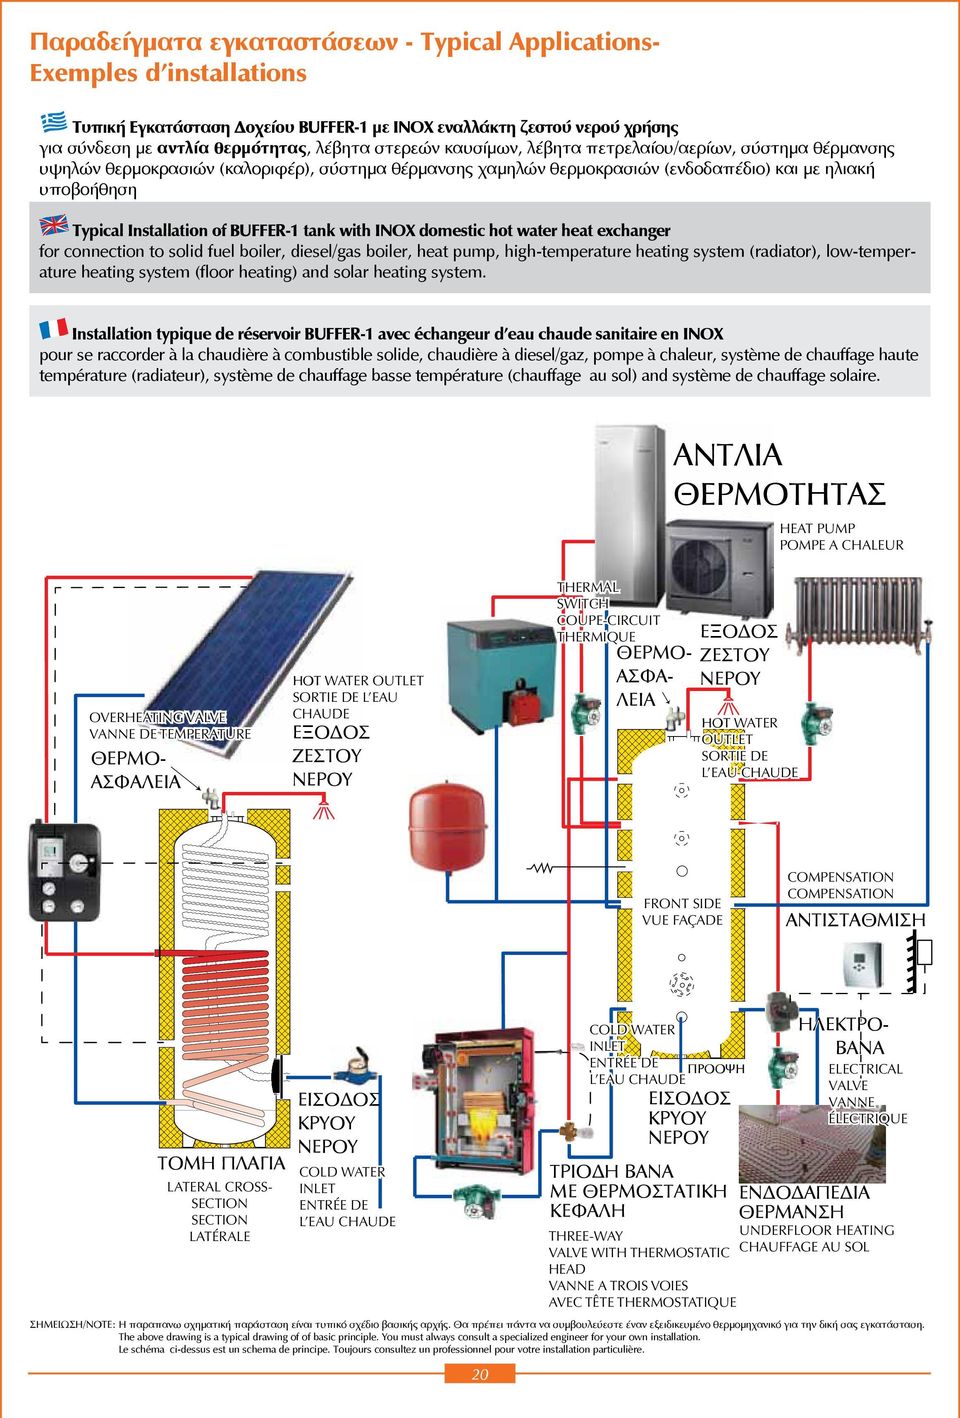 domestic hot water heat exchanger for connection to solid fuel boiler, diesel/gas boiler, heat pump, hightemperature heating system (radiator), lowtemperature heating system (floor heating) and solar